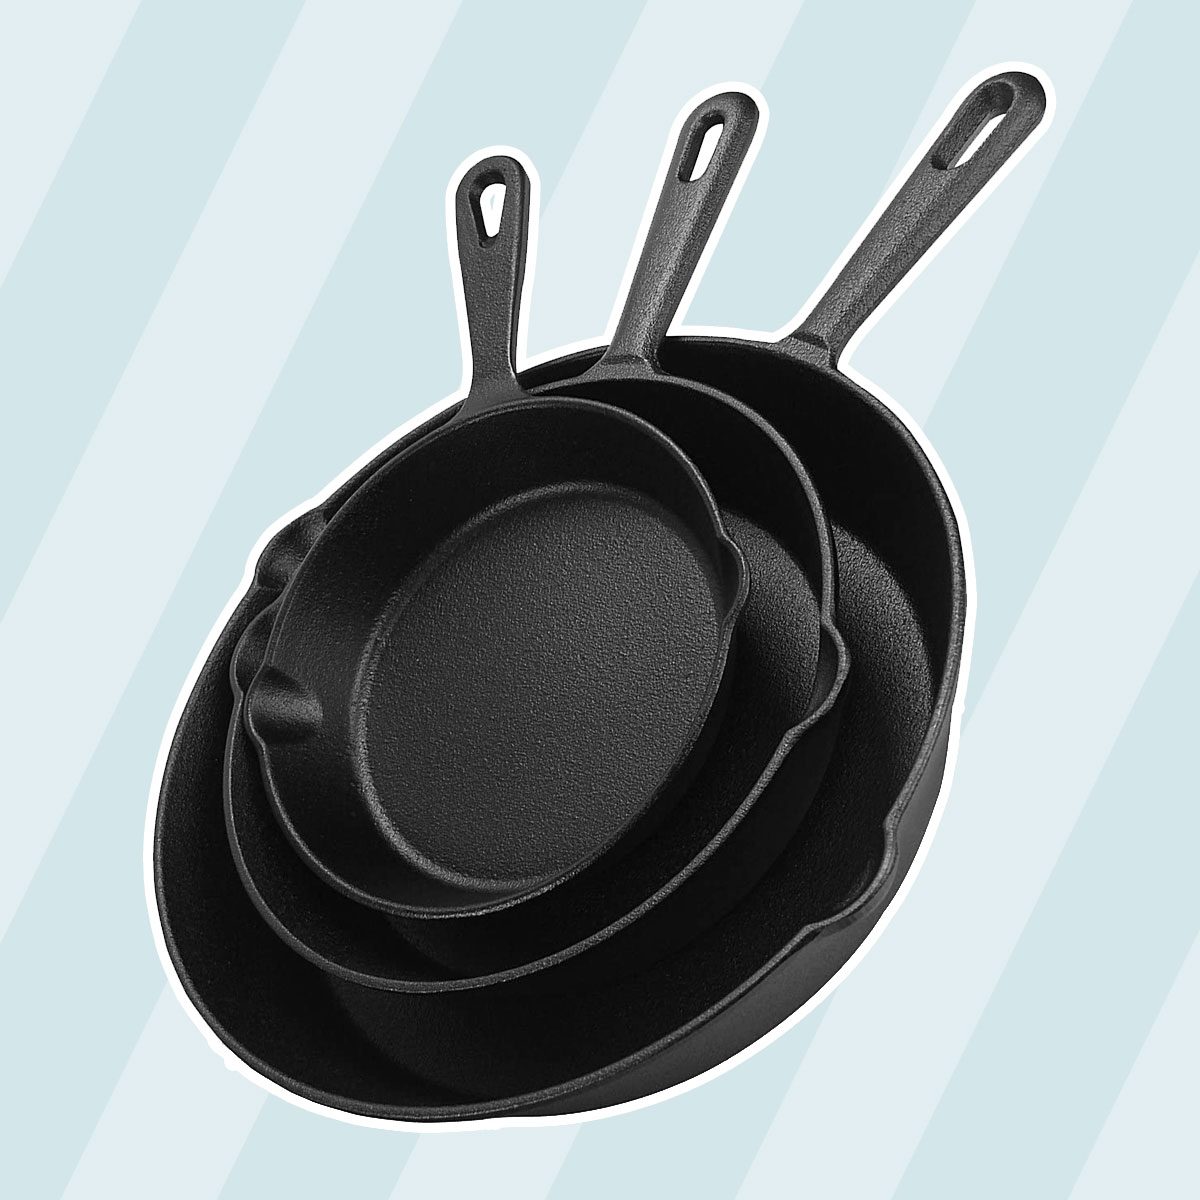 5+ cast iron  cookware deals you don't want to miss - Reviewed